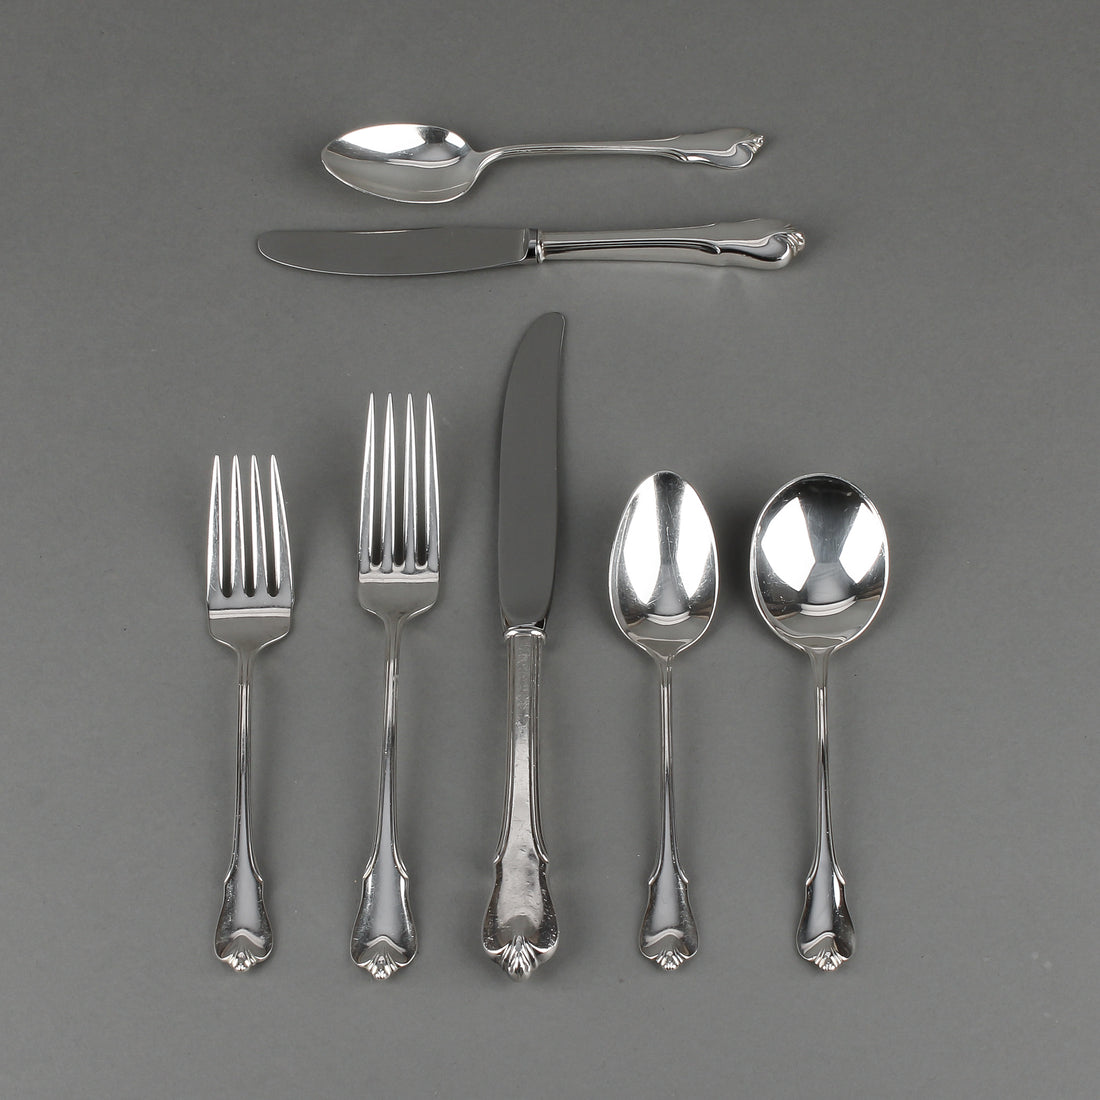 WALLACE Grand Colonial Sterling Silver Luncheon Flatware - 8 Place Settings +